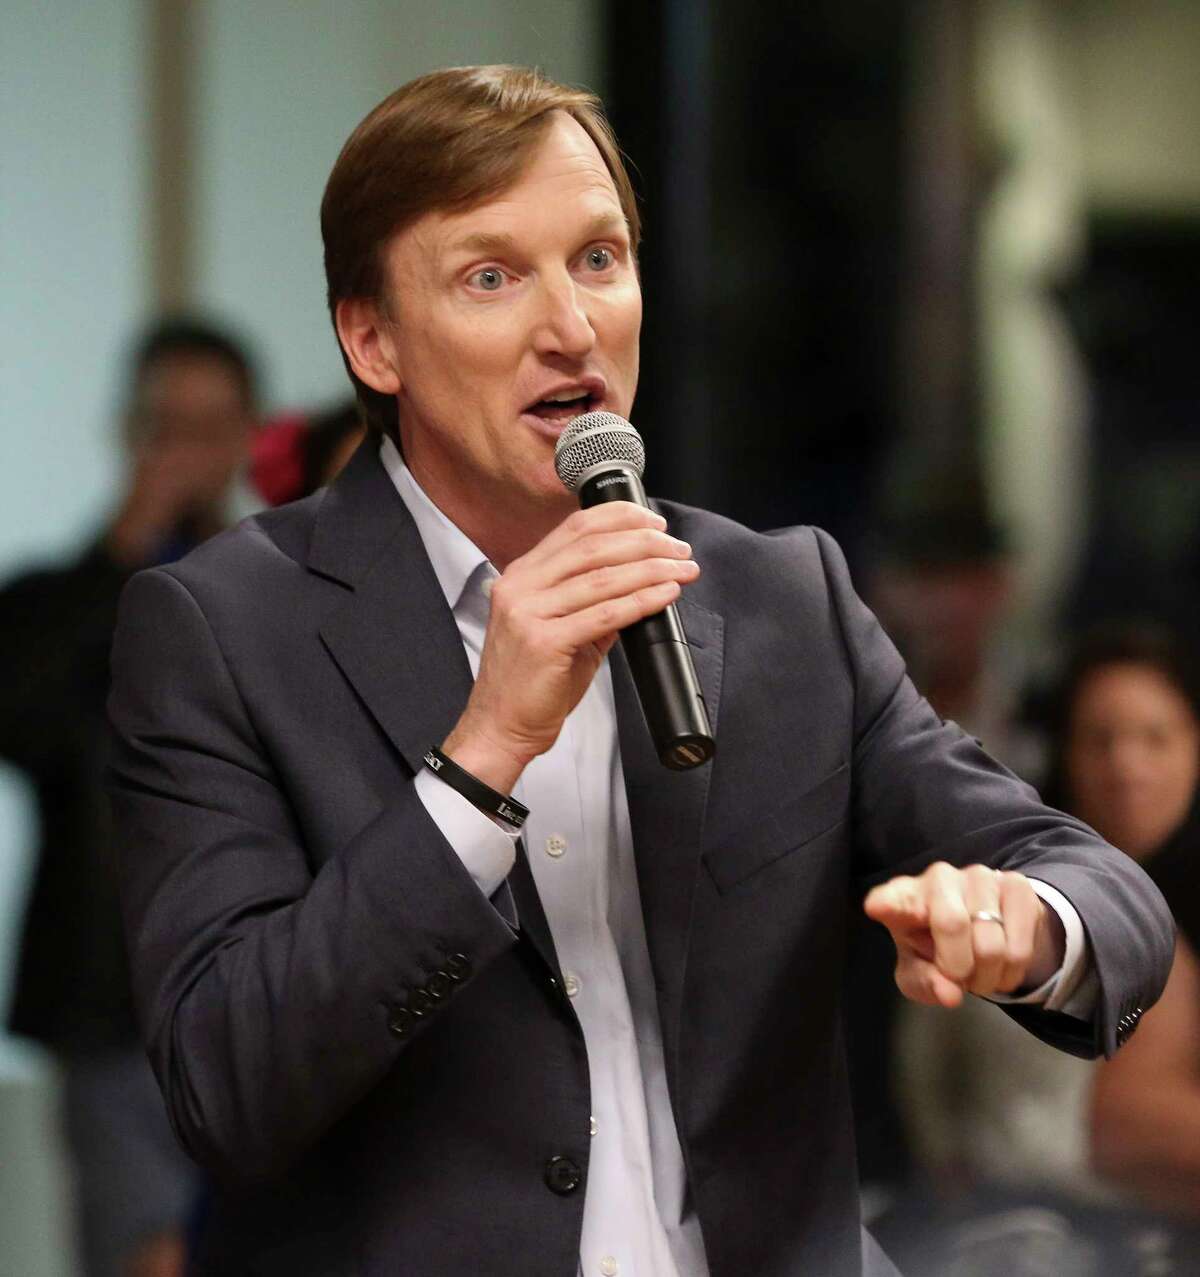 Andrew White, Democrat Party governor candidate for 2018 gubernatorial race, introduces himself to the crowd at a Democratic forum at Deluxe Theatre on Wednesday, Jan. 24, 2018, in Houston.